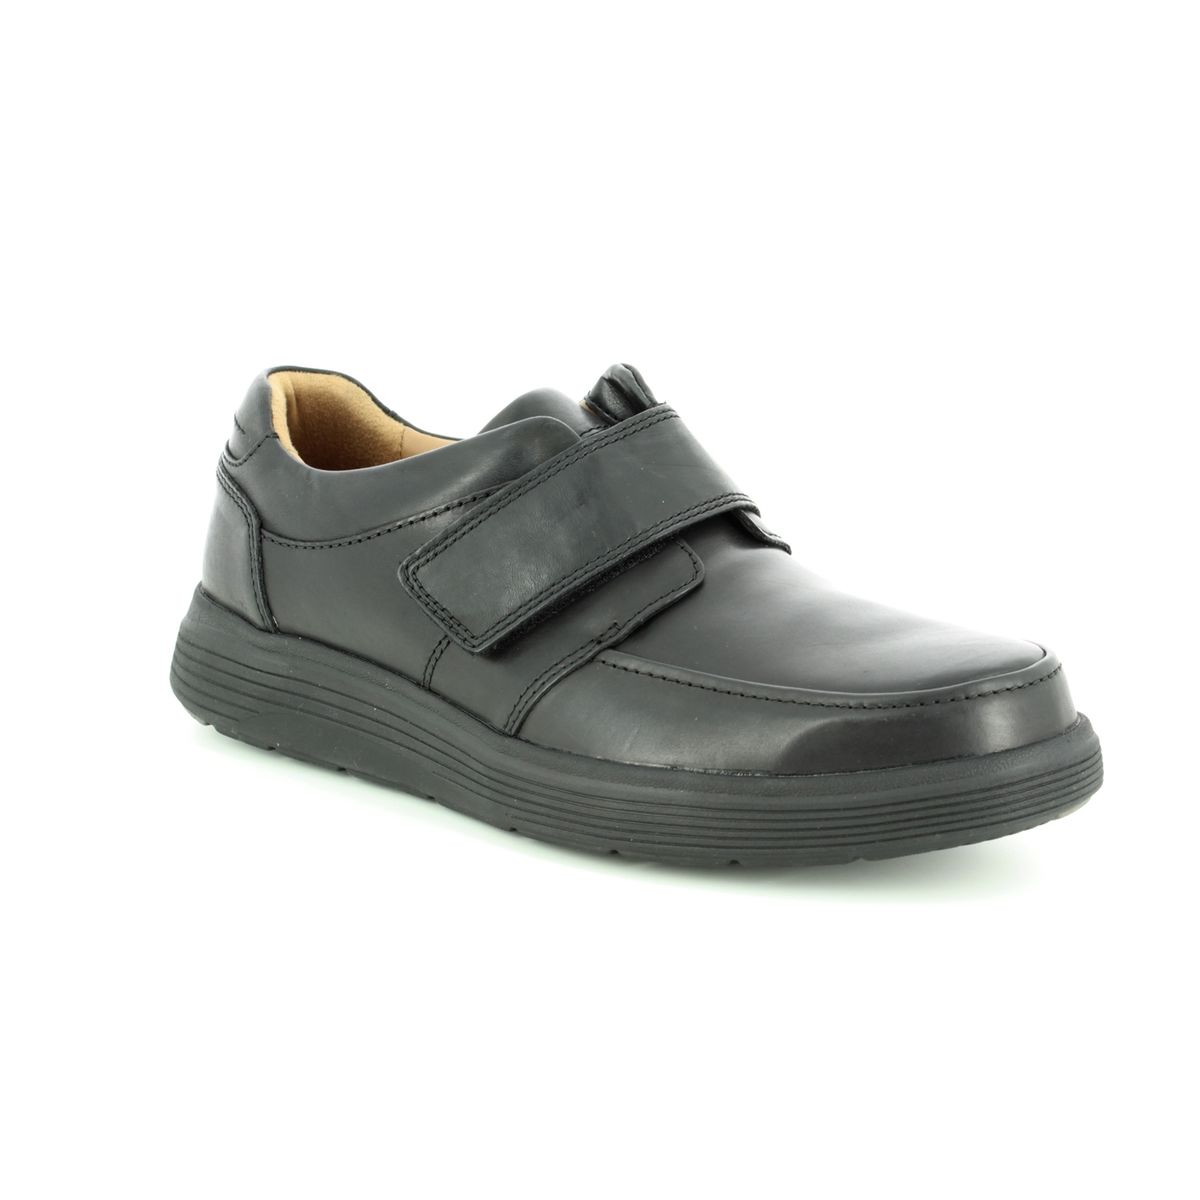 Clarks Un Abode Strap Black Leather Mens Comfort Shoes 3698-68H In Size 6 In Plain Black Leather H Width Fitting Extra Wide